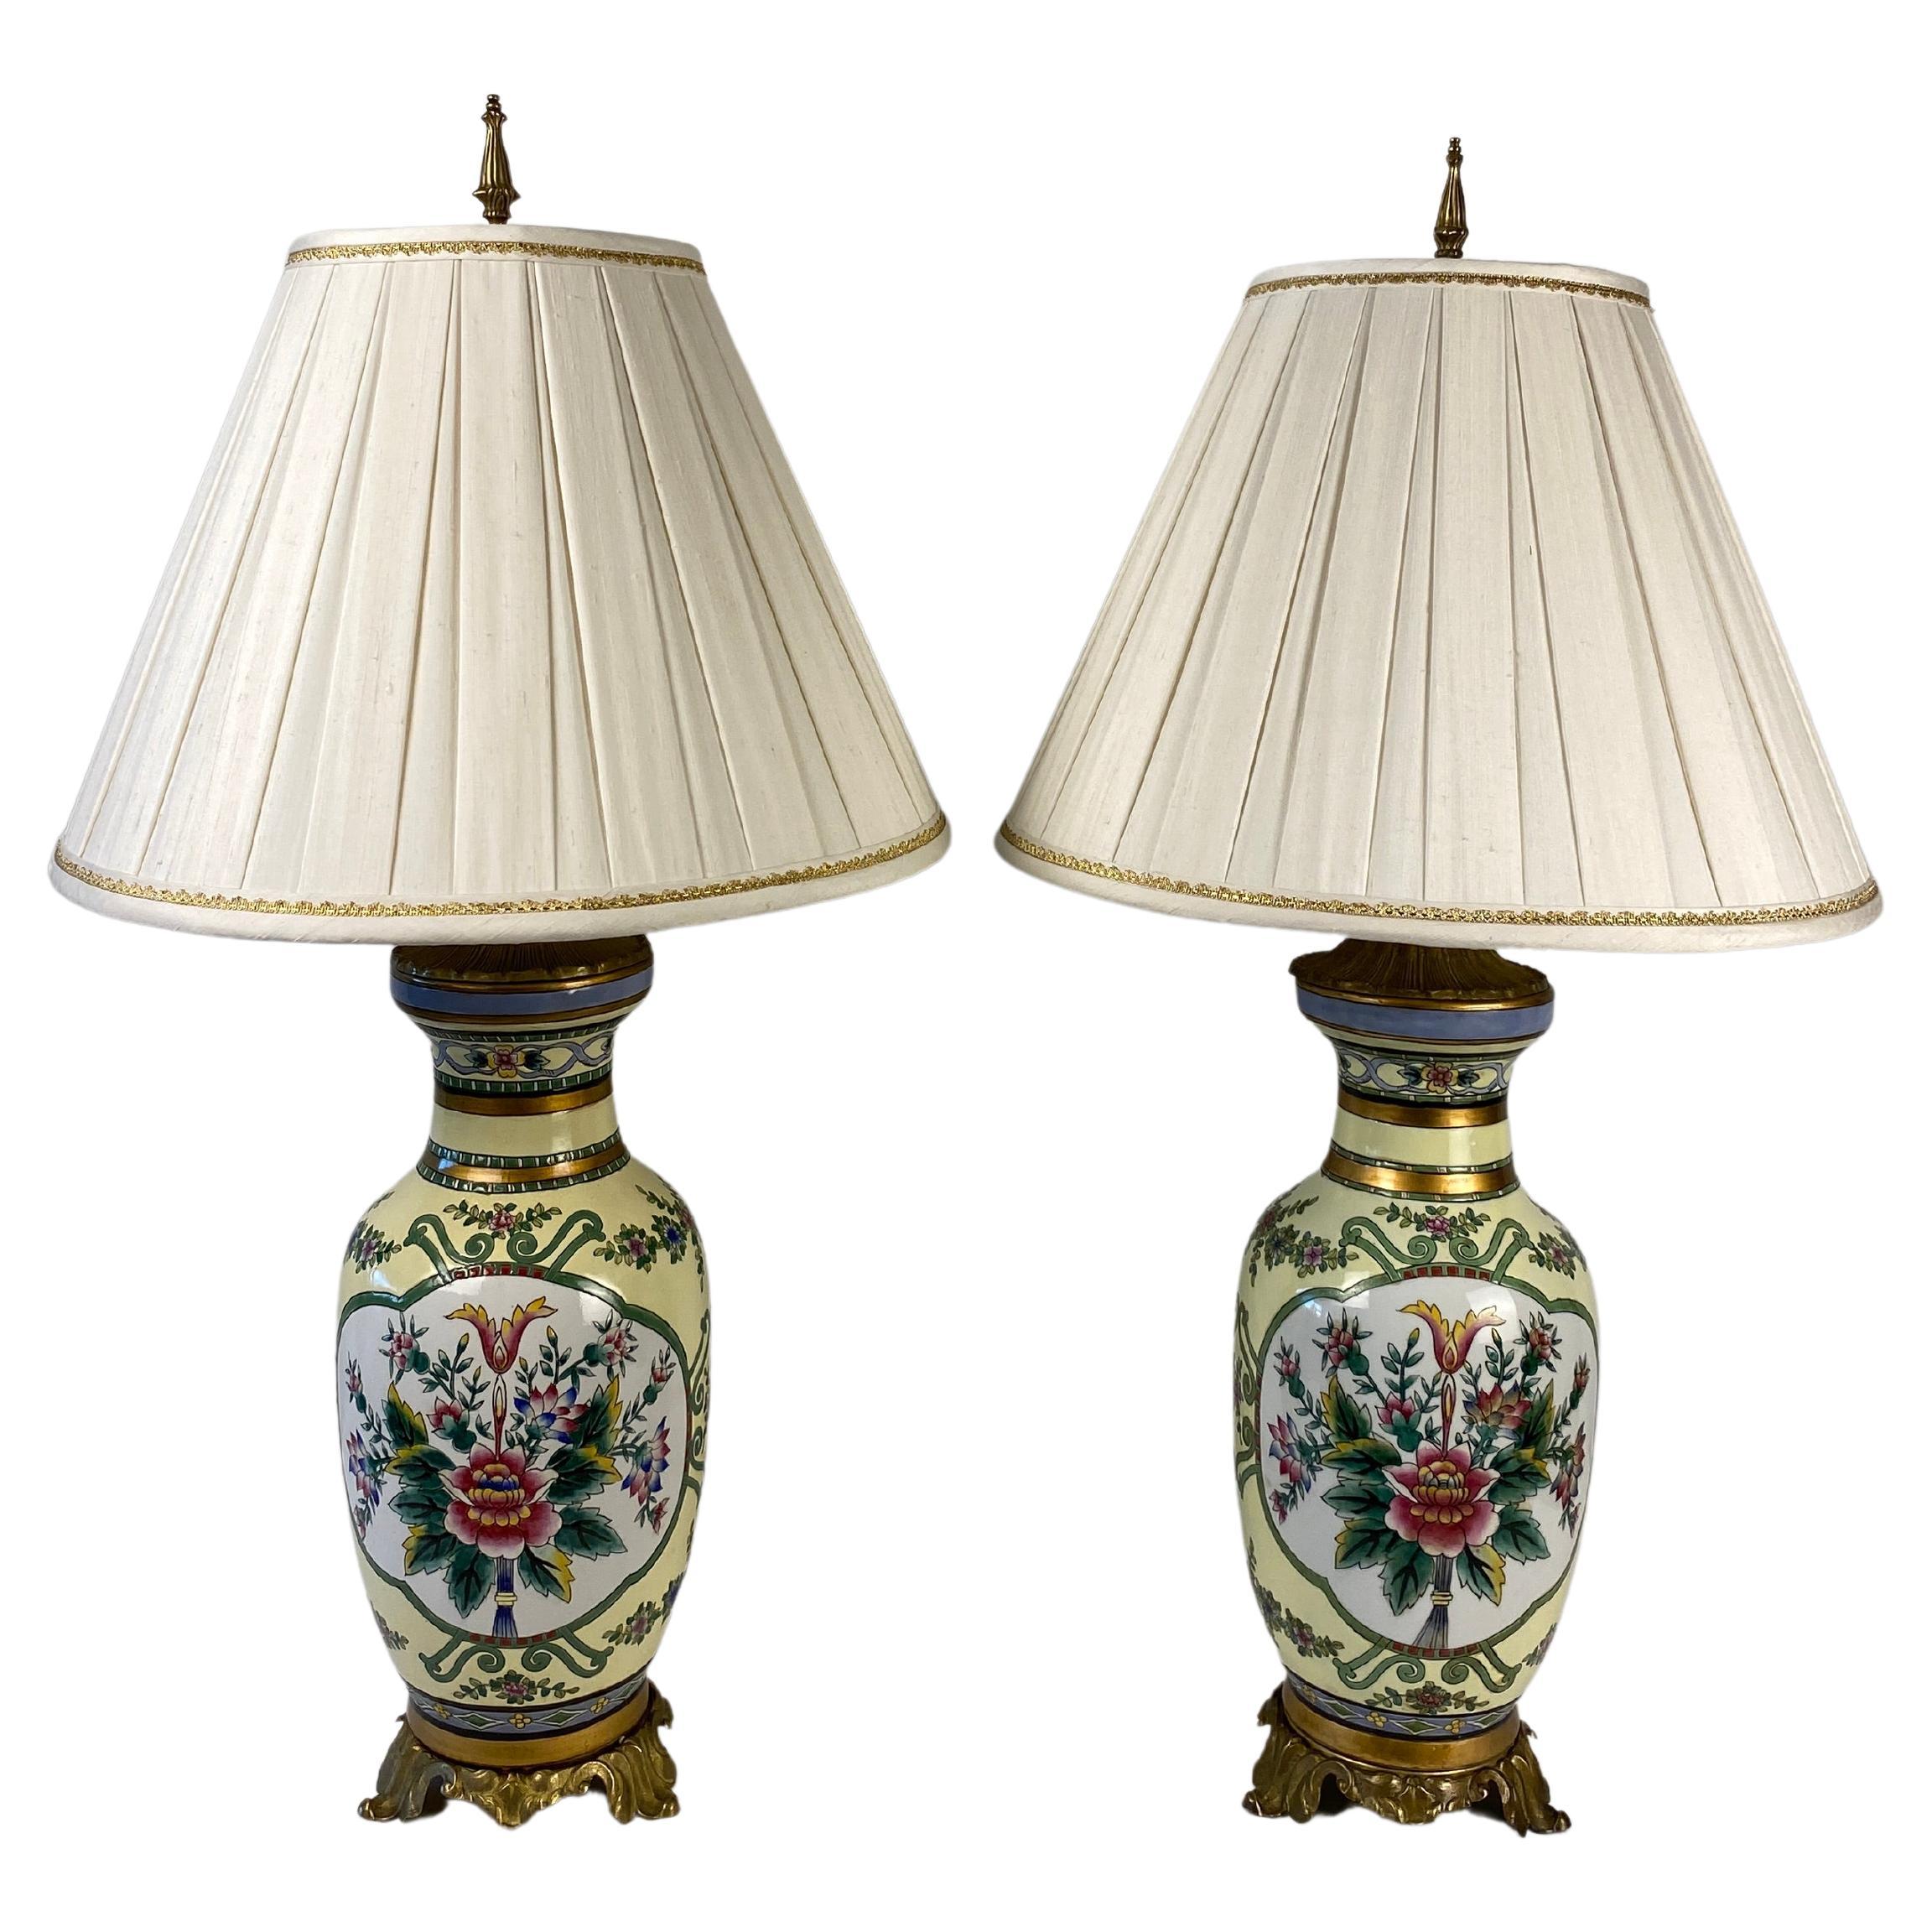 Pair of French Hand Painted Porcelain Gilt Bronze Mounted Table Lamps